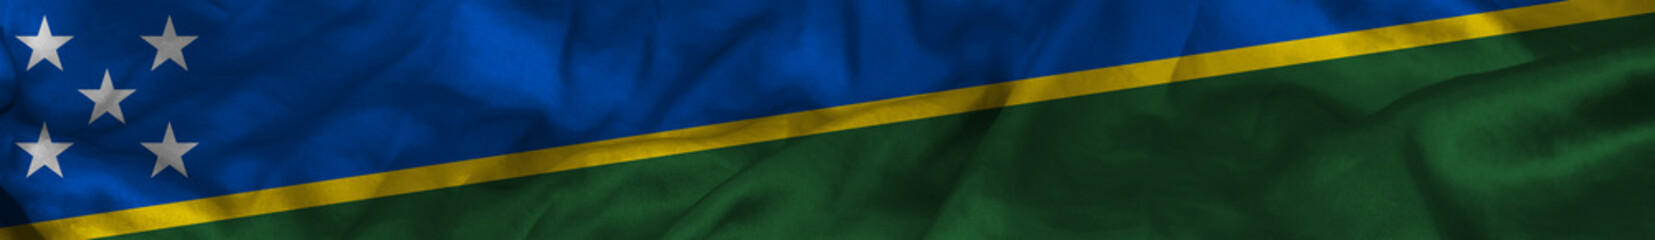 Elongated national flag of Solomon Islands with a fabric texture fluttering in the wind. Solomon Islands flag for website design. 3d illustration